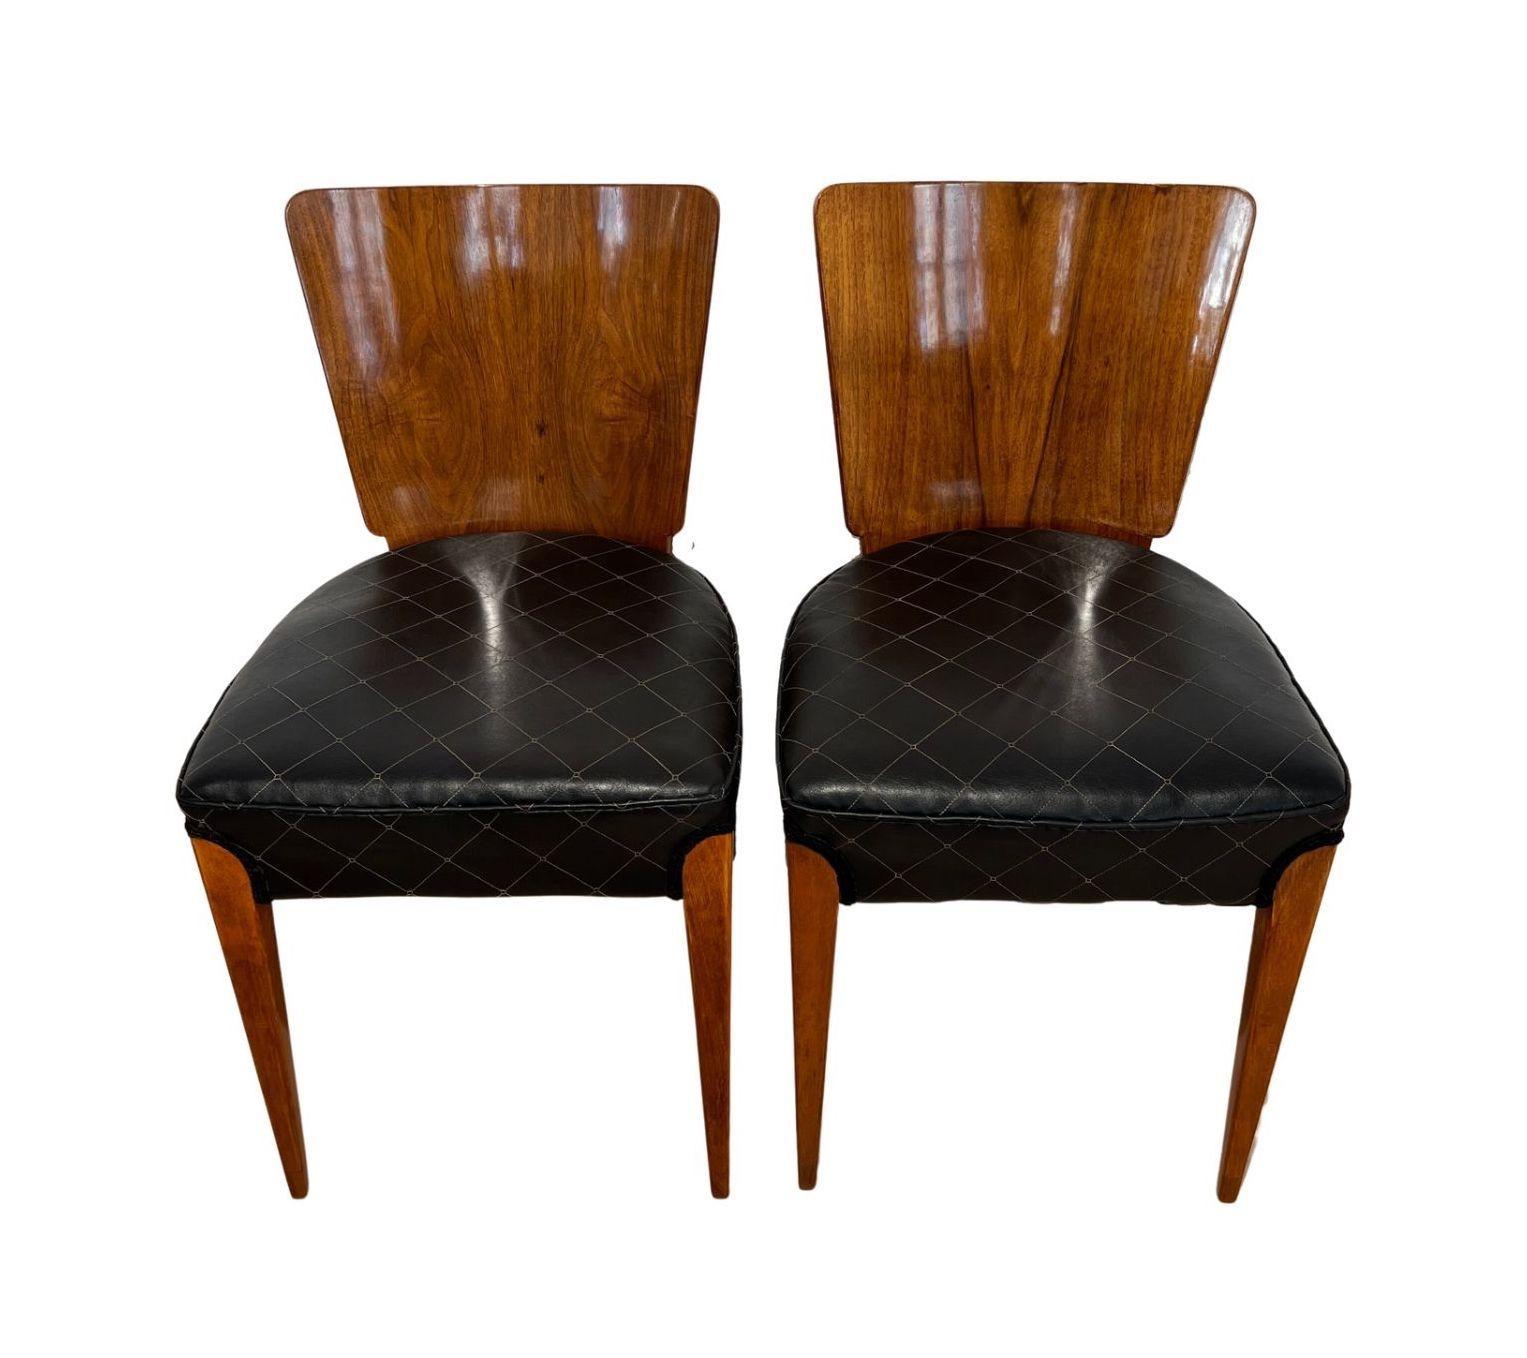 Pair of Art Deco chairs H-214 by J. Halabala from Czech Republic around 1930
* Design: Jindrich Halabala (1903 - 1978)
* Manufacturer: UP Zavody
* Walnut veneer on backboard
* Solid beech legs
* Newly uphstered, very comfortable
* Uphstered in black